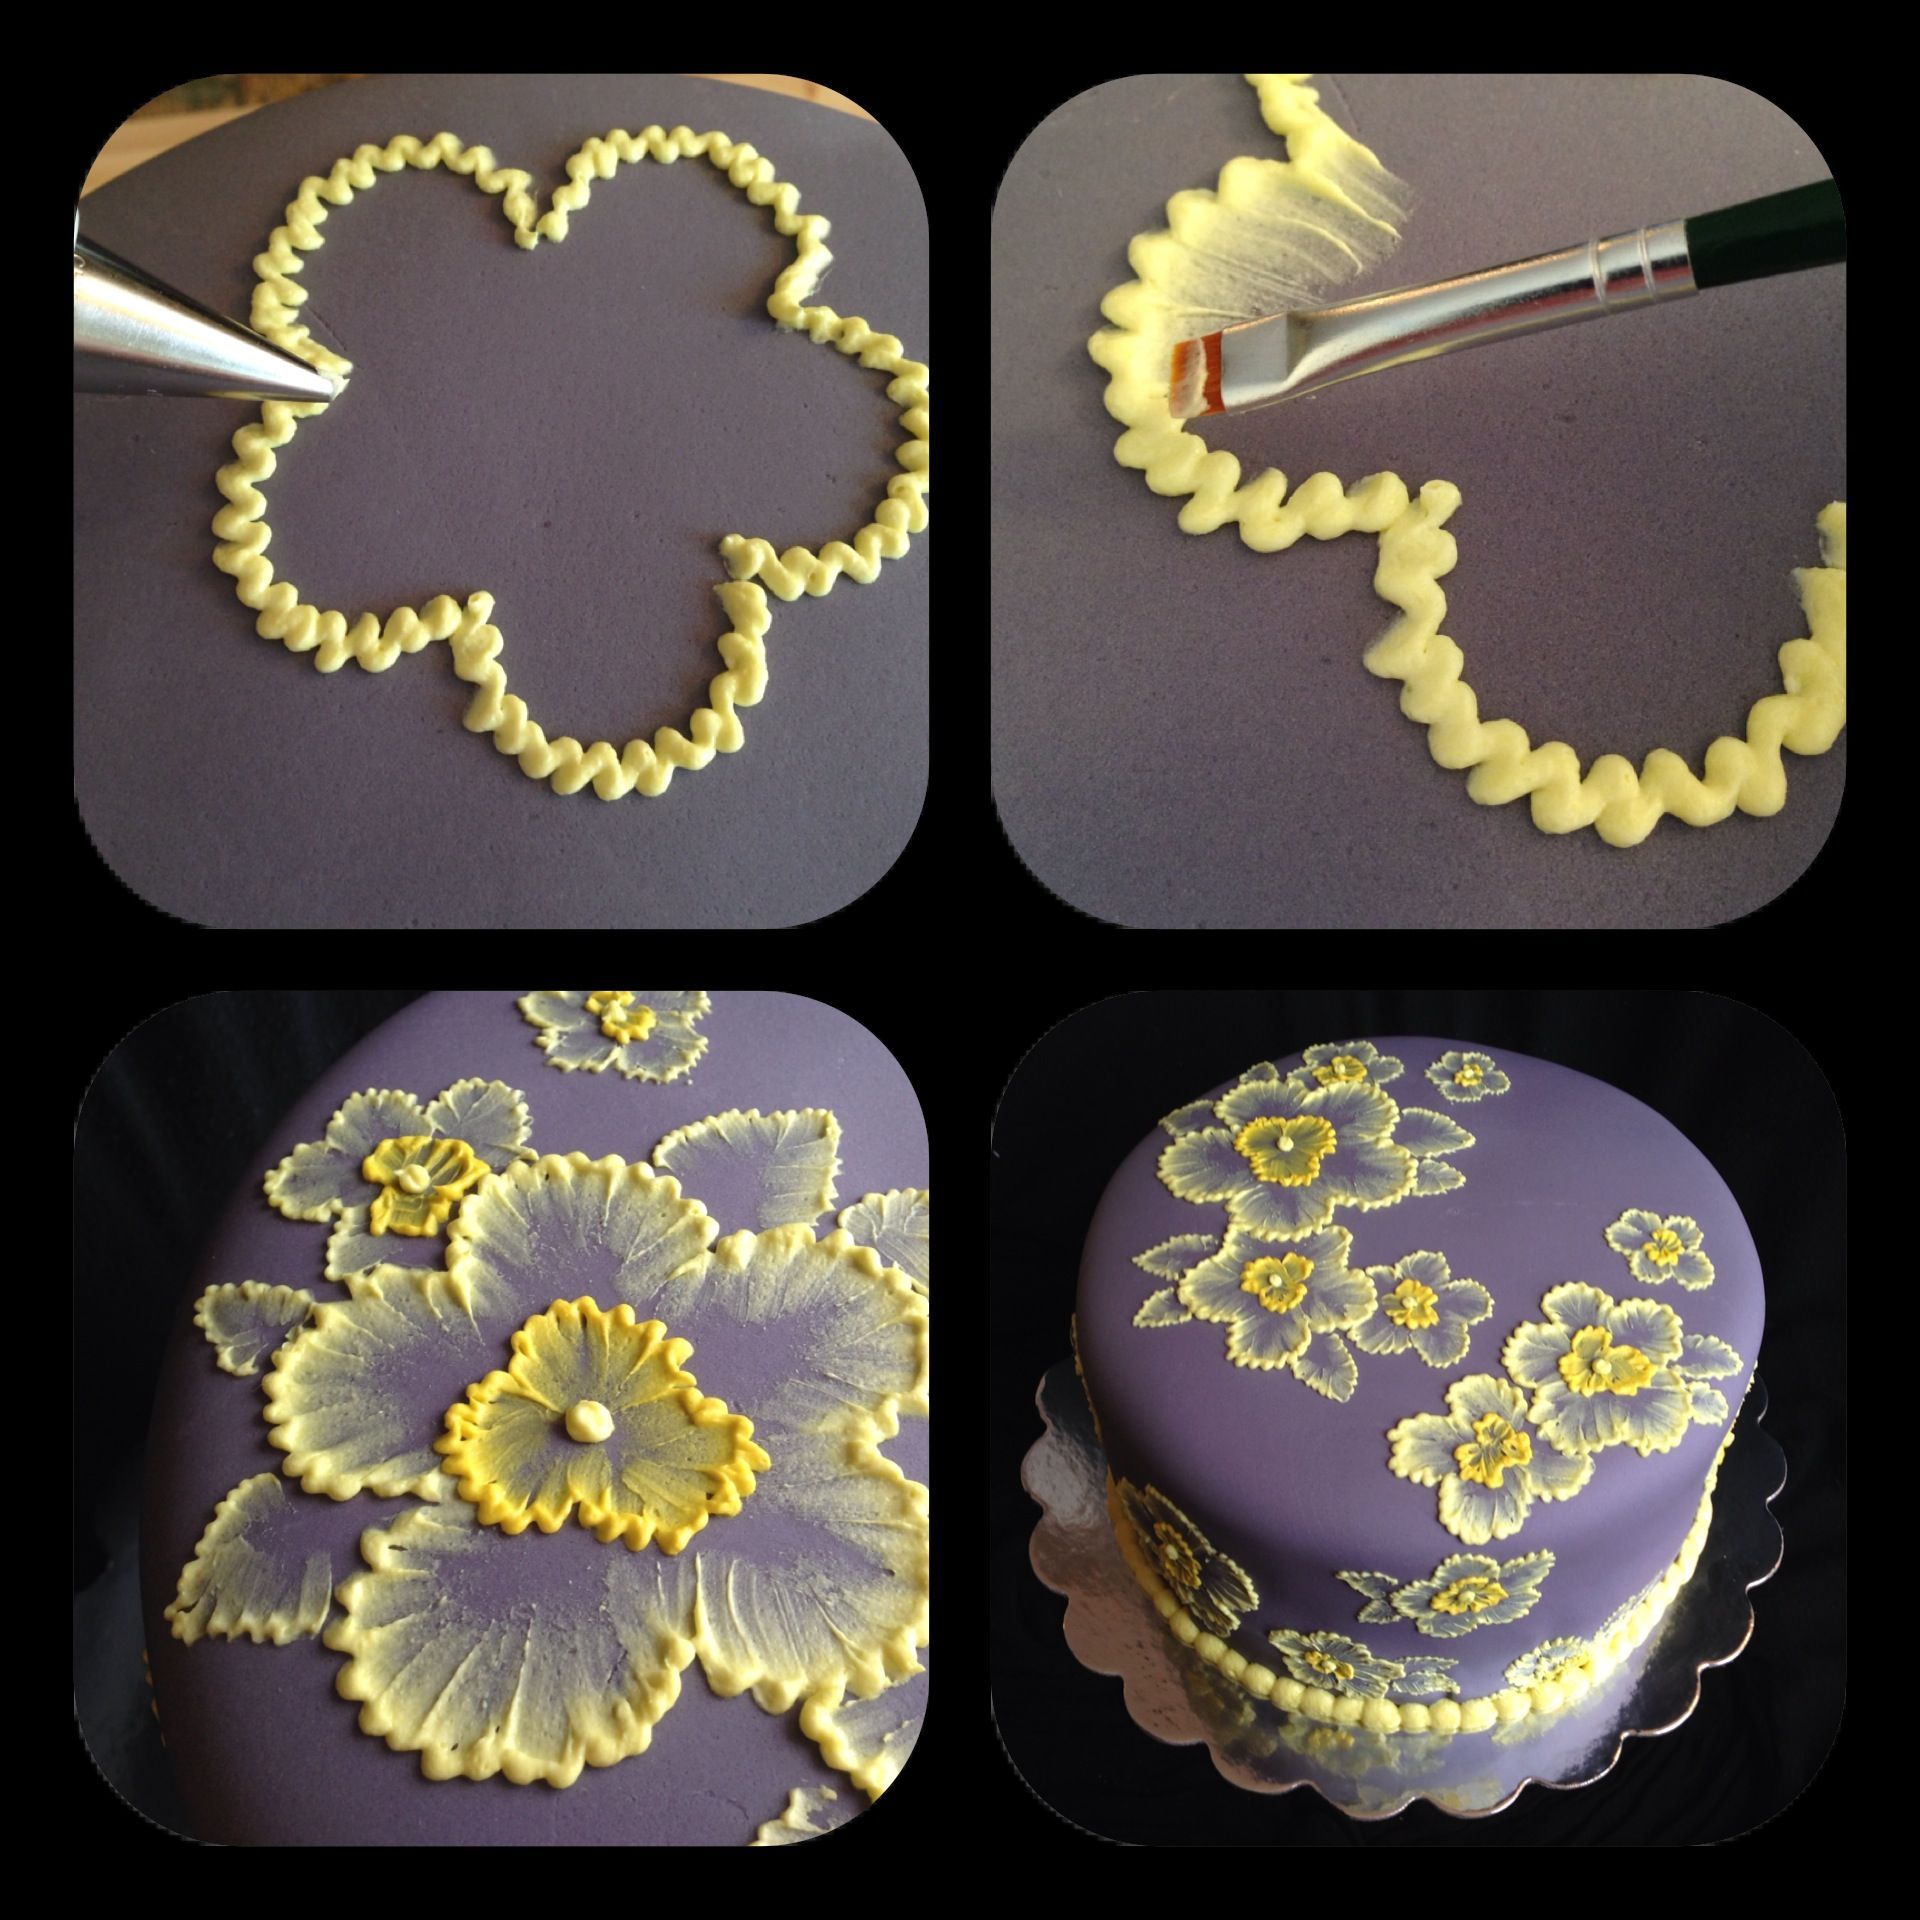 brush embroidery cake with yellow flowers